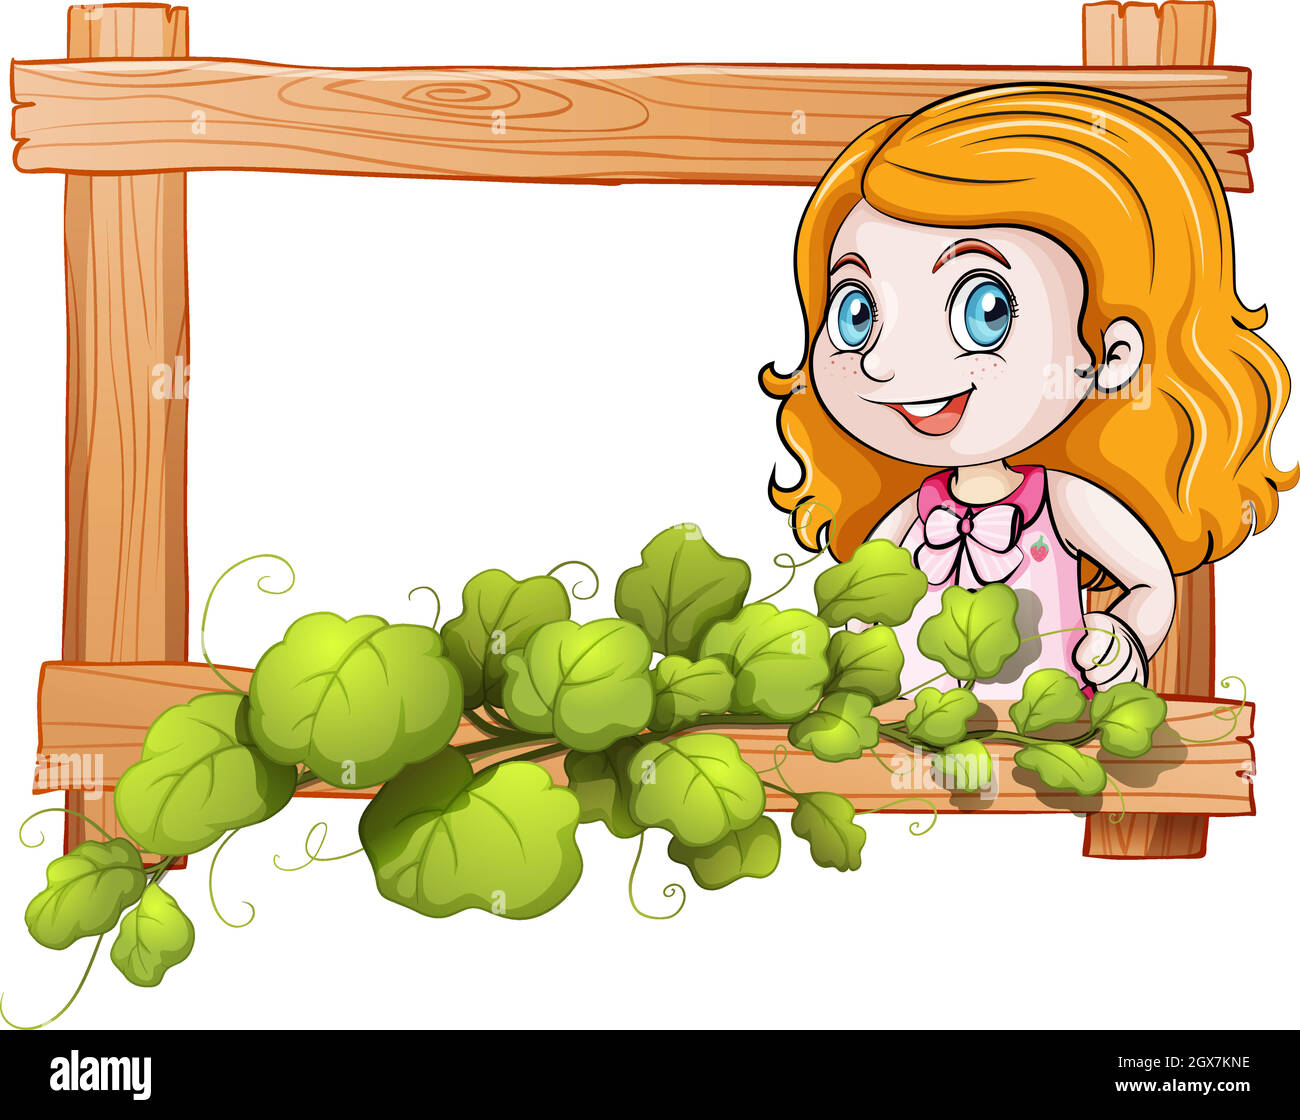 A frame with a lady and green plants Stock Vector